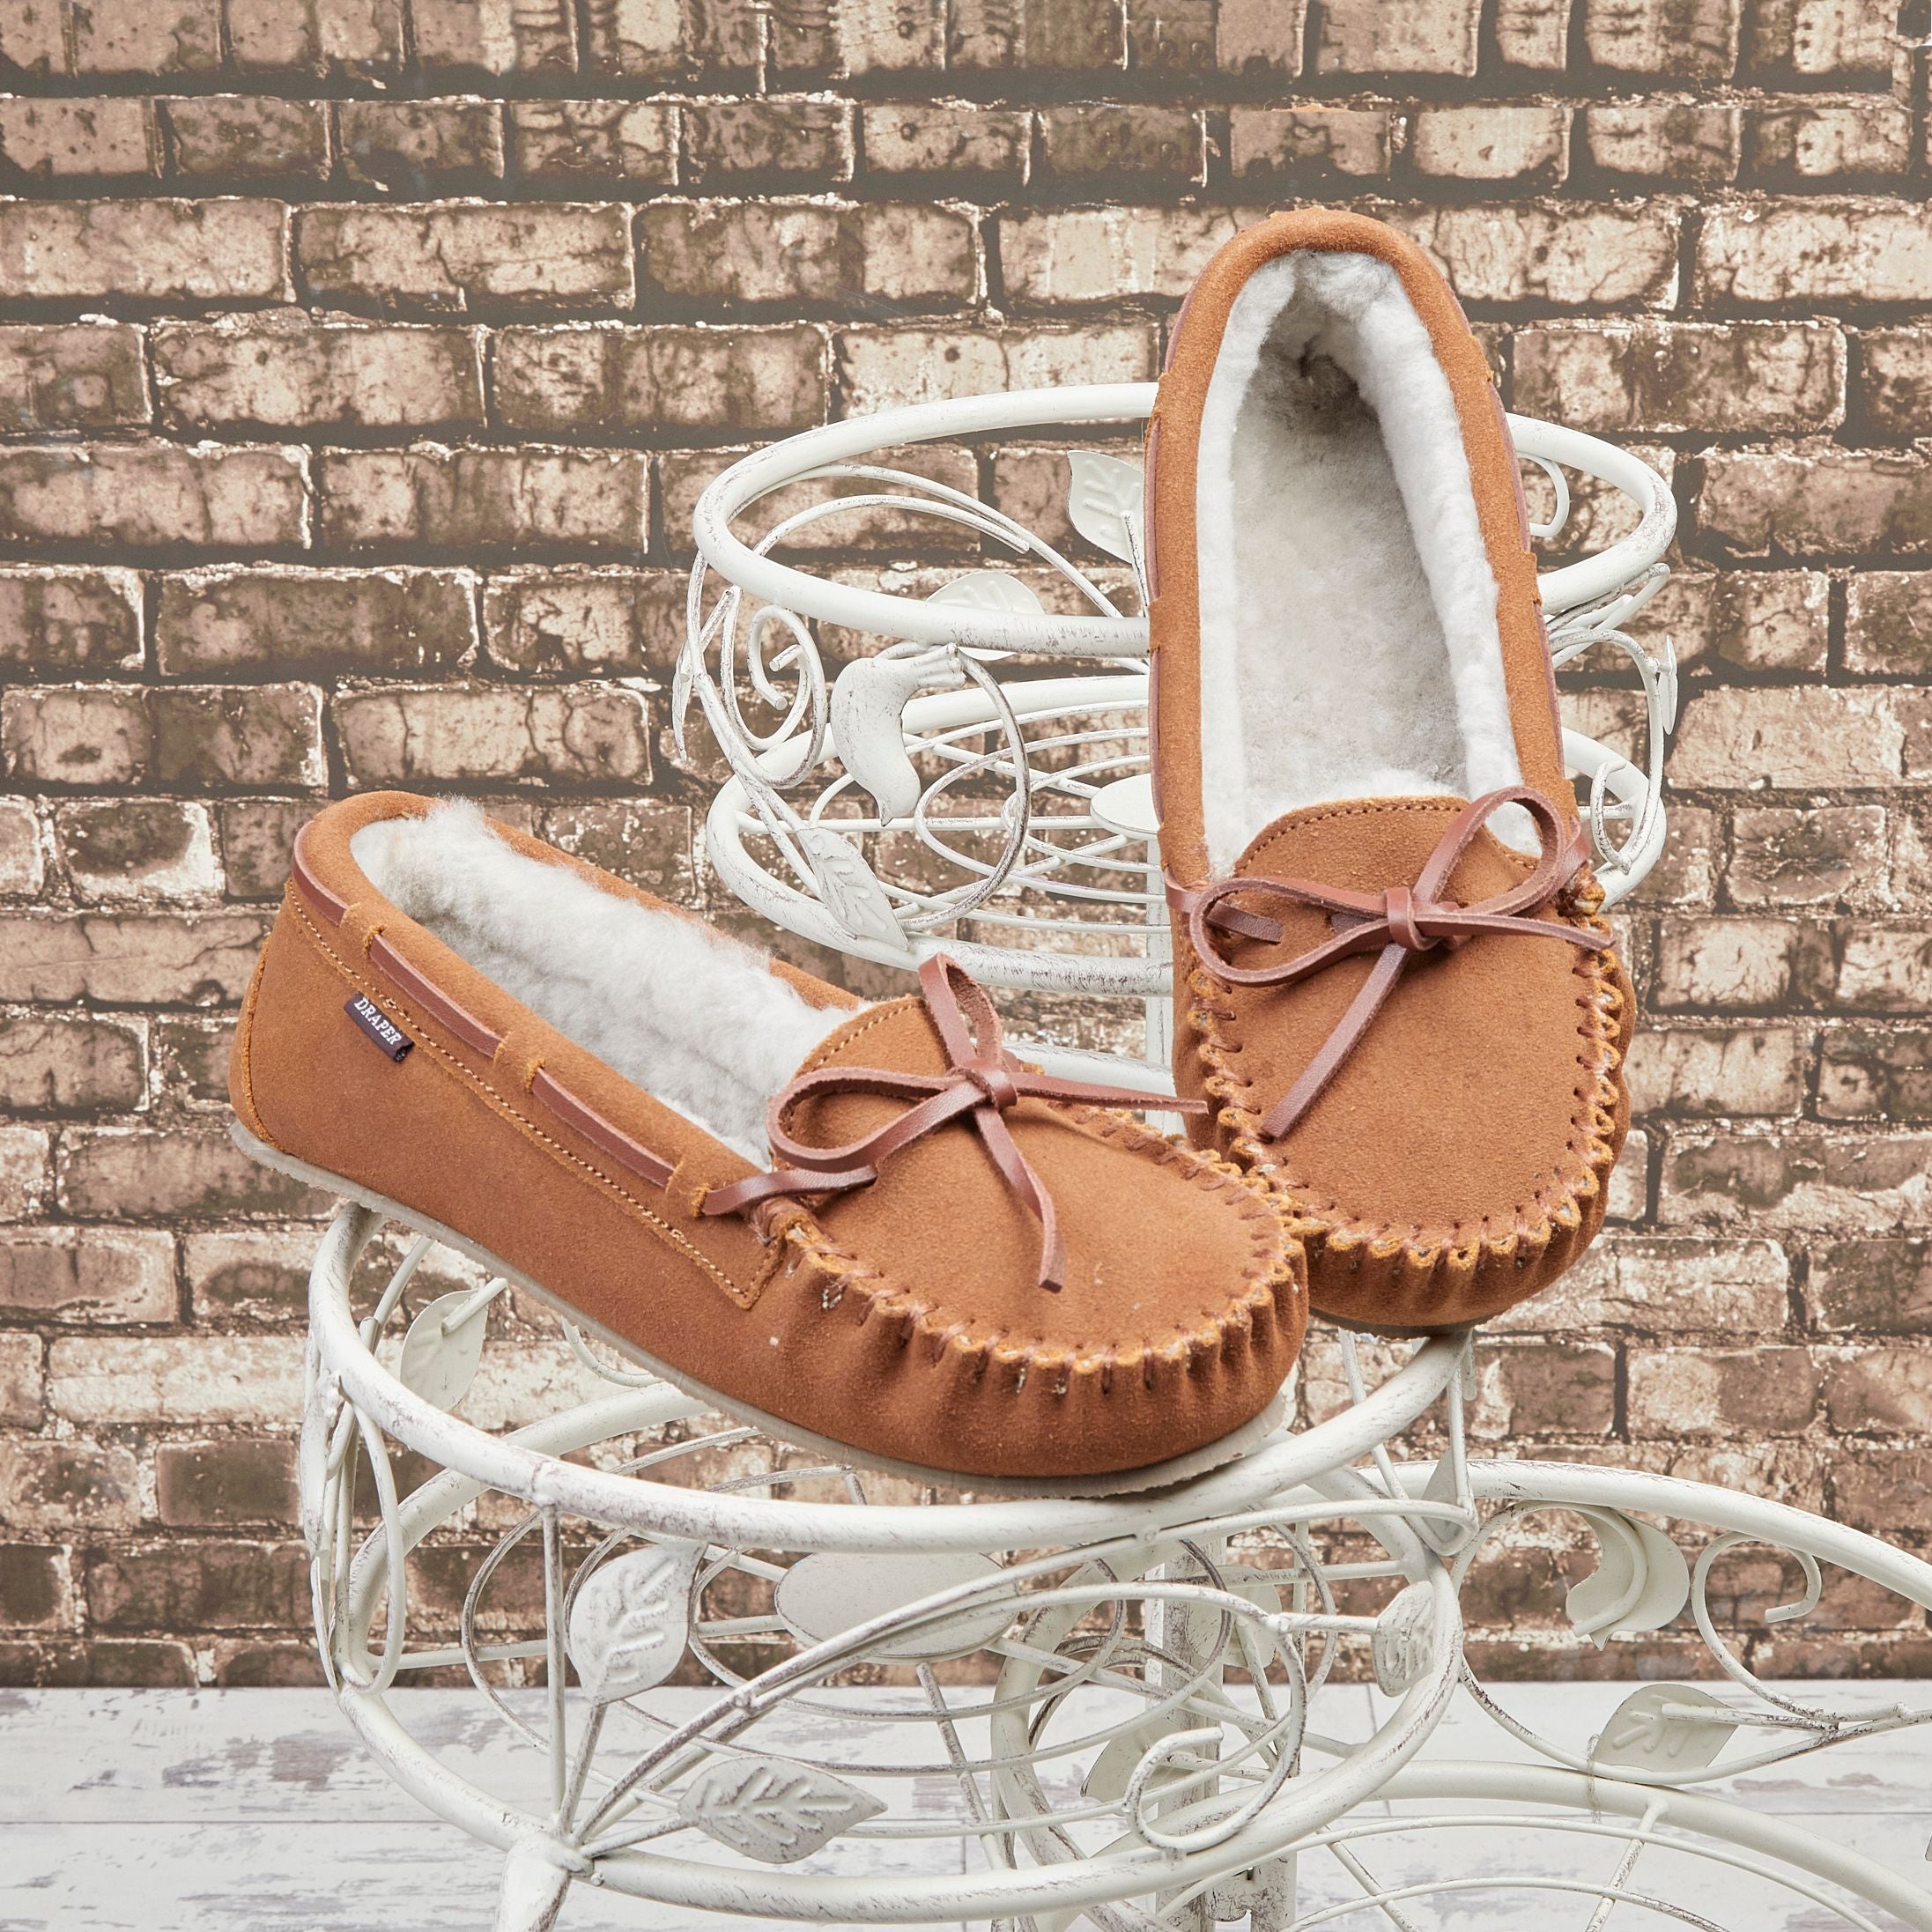 shearling moccasin slippers